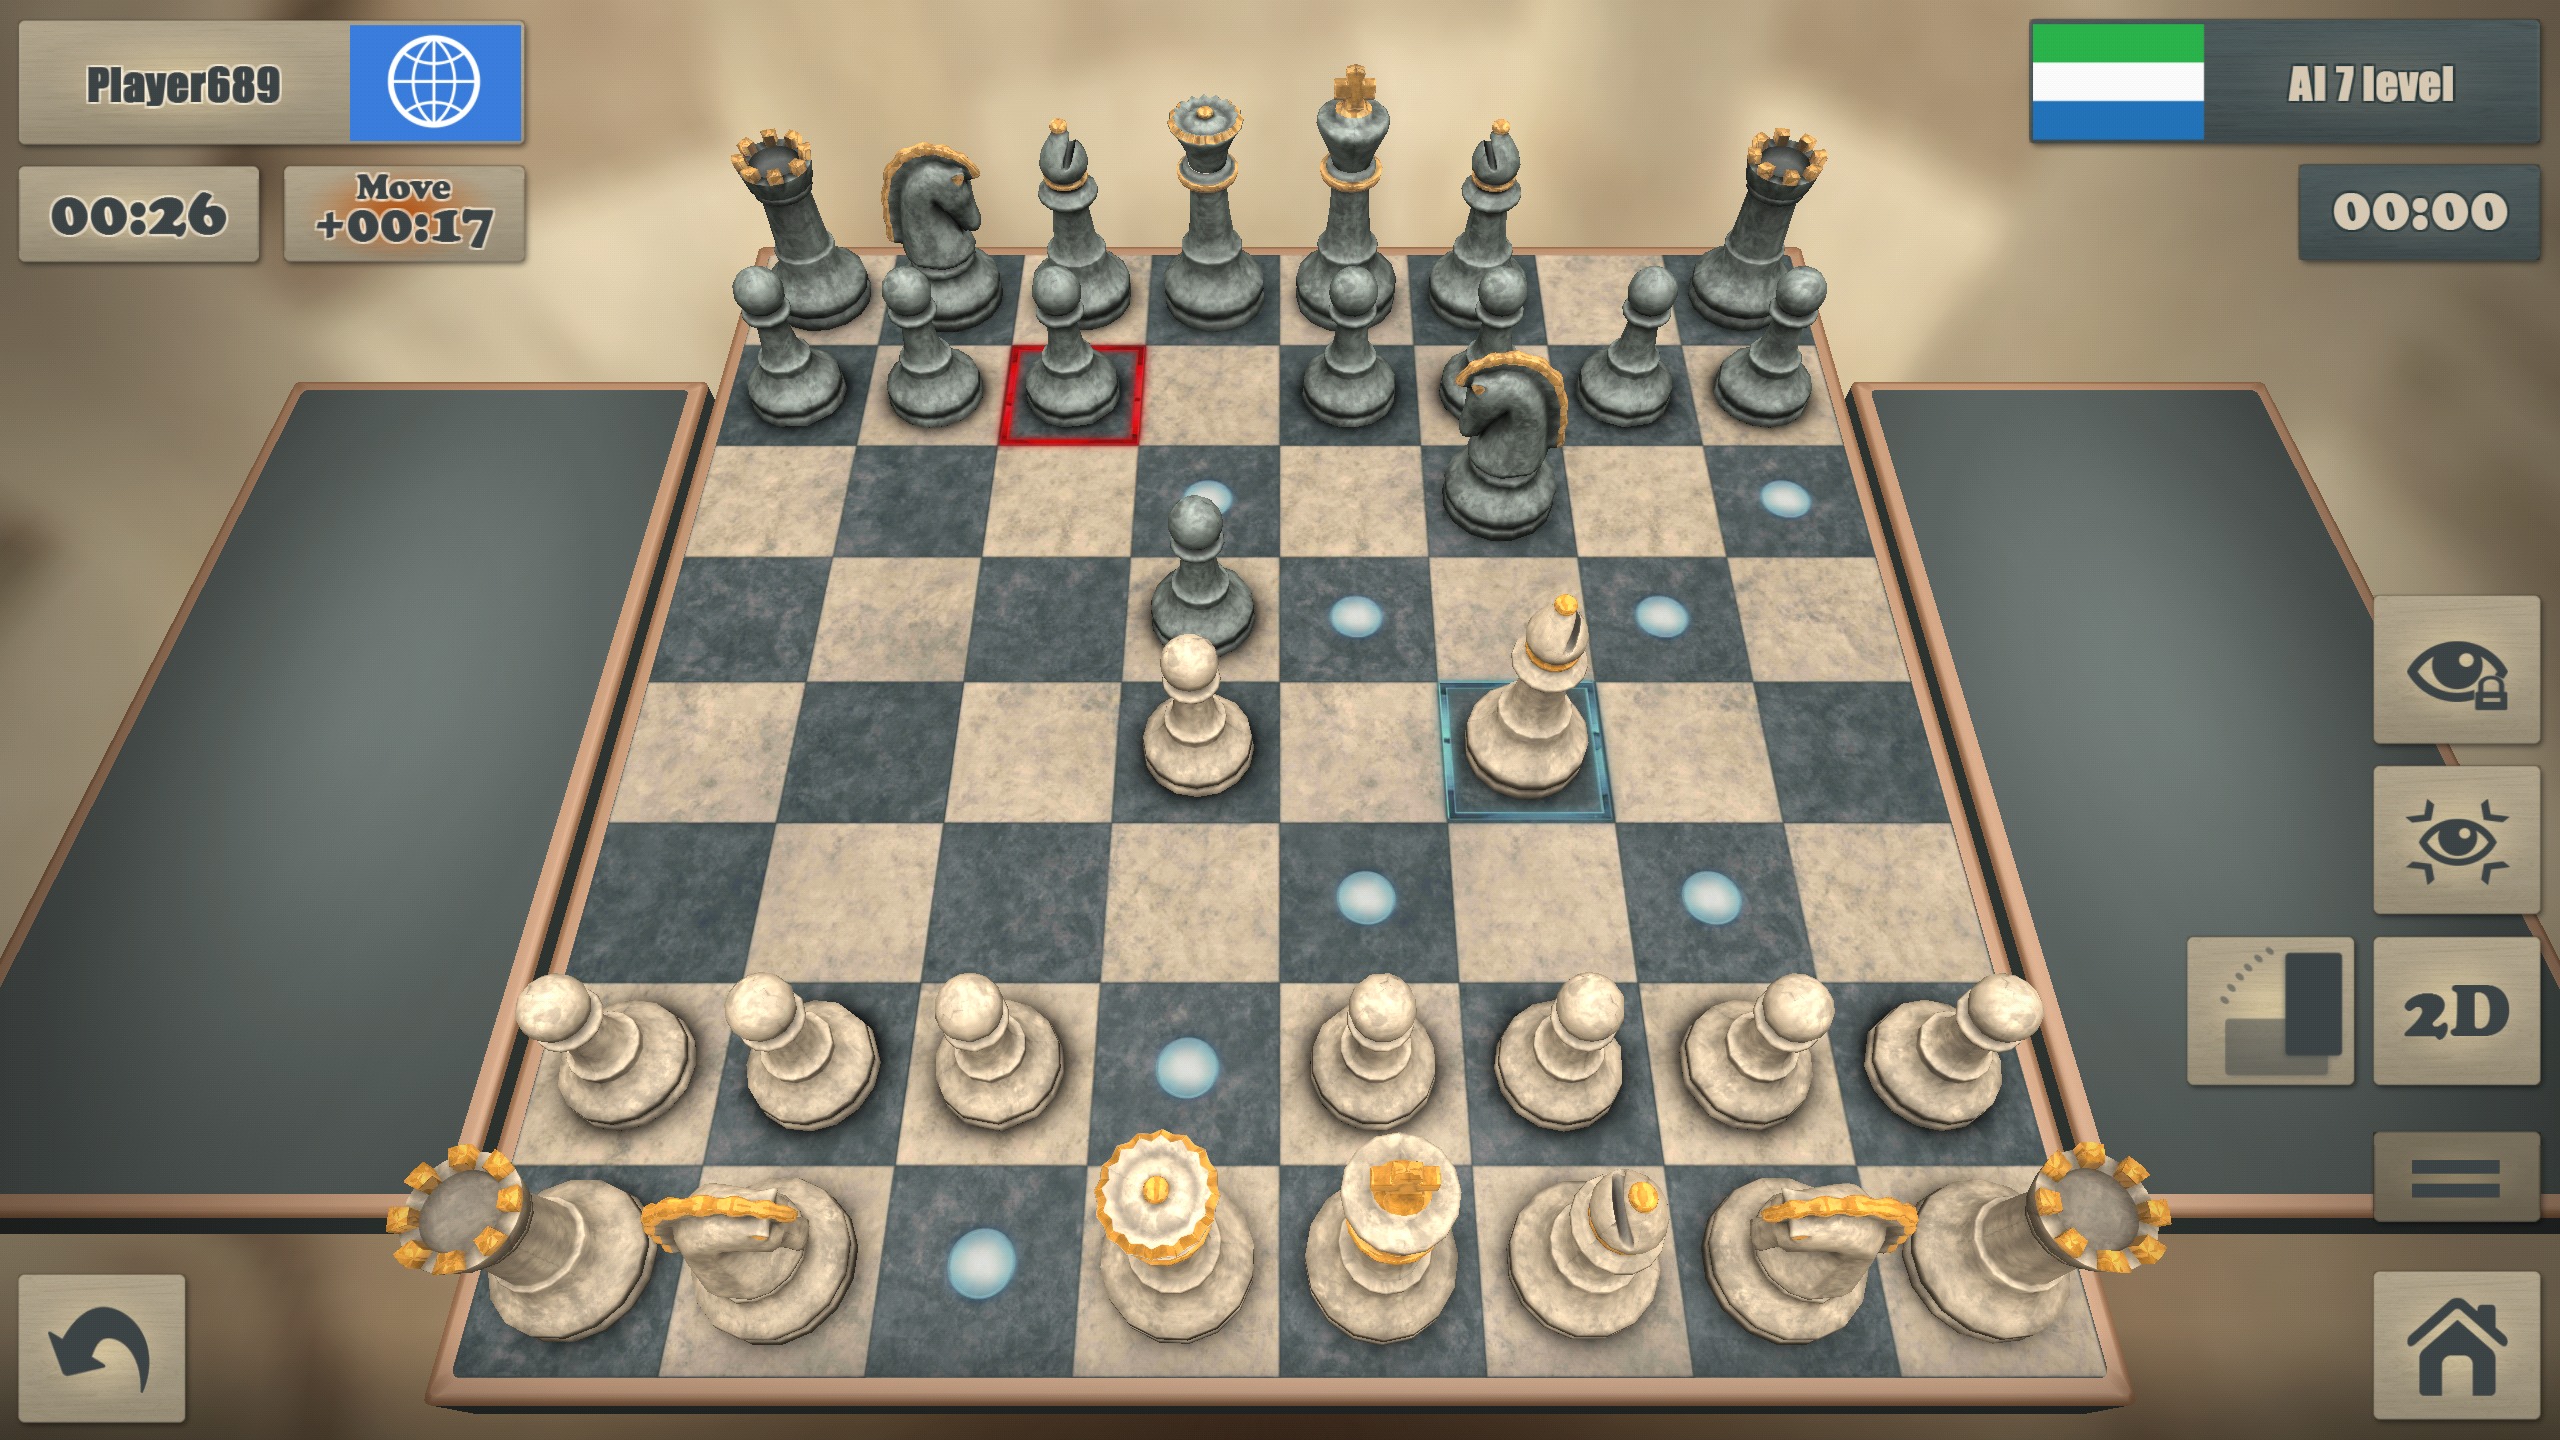 SparkChess Pro (by Media Division SRL) - chess game for Android and iOS -  gameplay. 